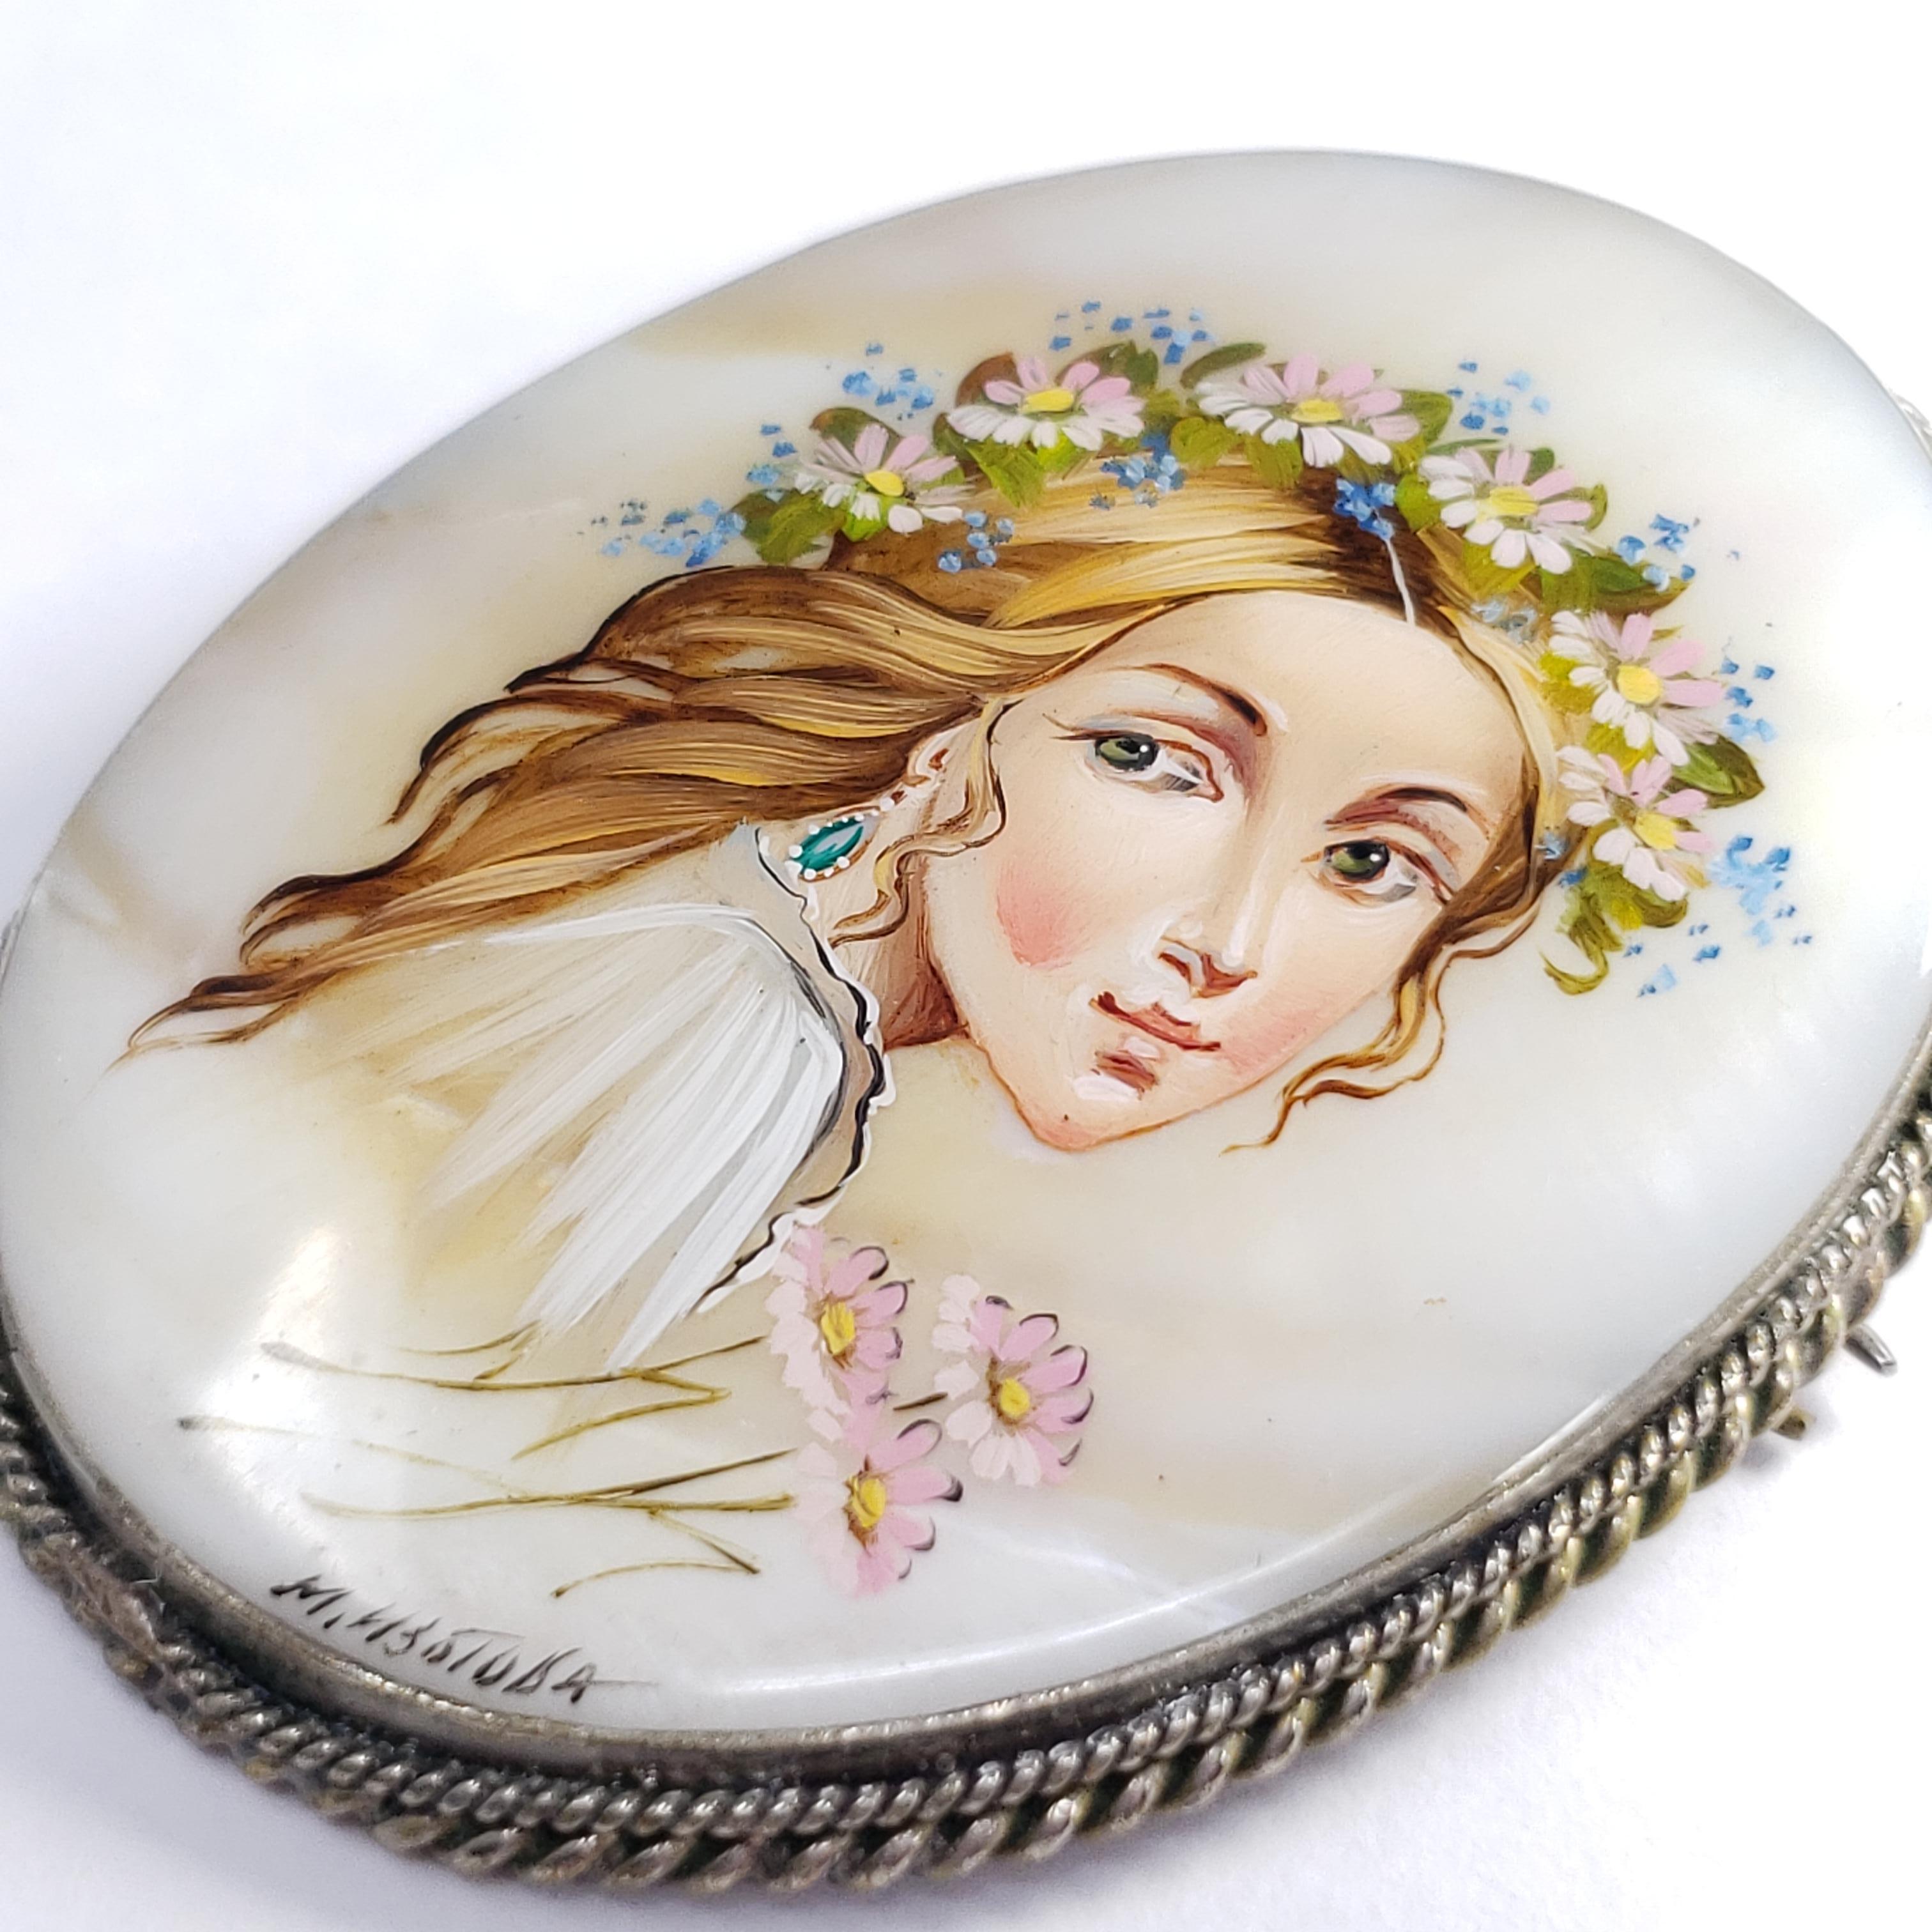 An exquisite Russian Fedoskino brooch set in a beautiful German silver bezel. Features a likeness of a beautiful woman in a floral head wreath, hand-painted on a mother-of-pearl stone with a layer of lacquer.

Signed by artist - M Izotova (М